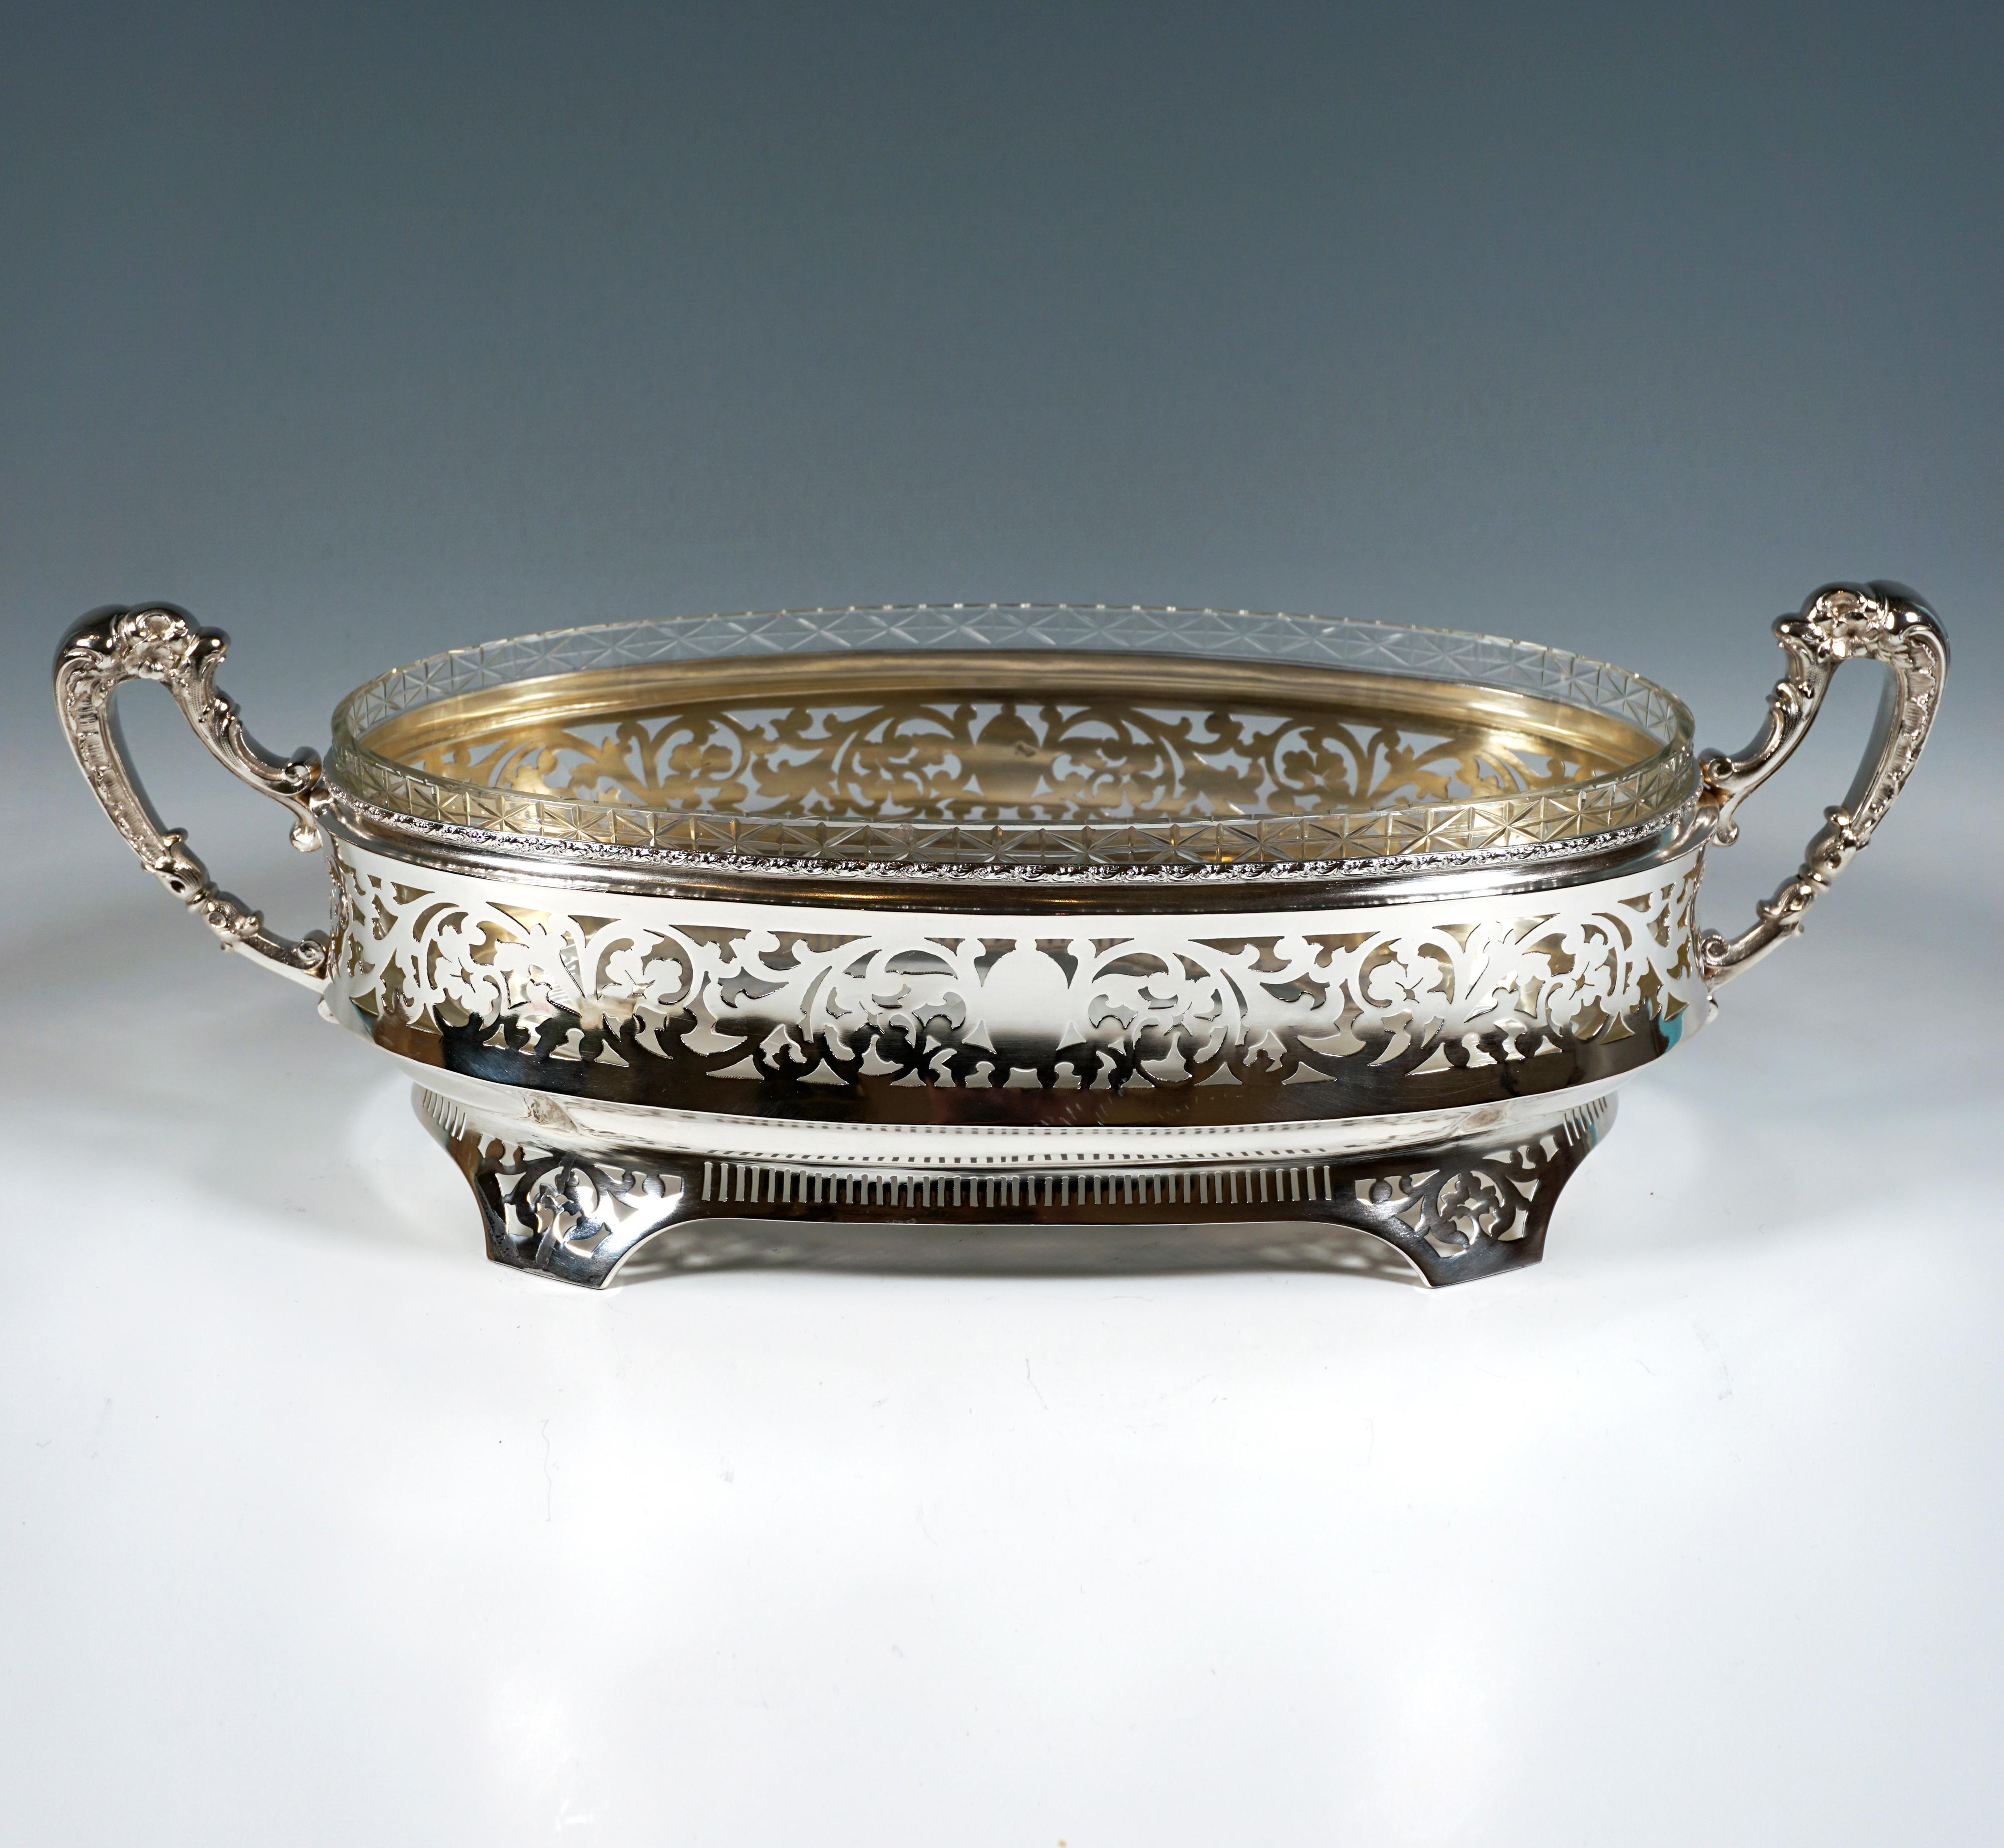 Elegant silver jardinière with an elliptical ground plan, the vertical wall slightly flared at the bottom and decorated with large-scale floral openwork, below a constriction and the formation of a foot section with four projecting feet with floral,